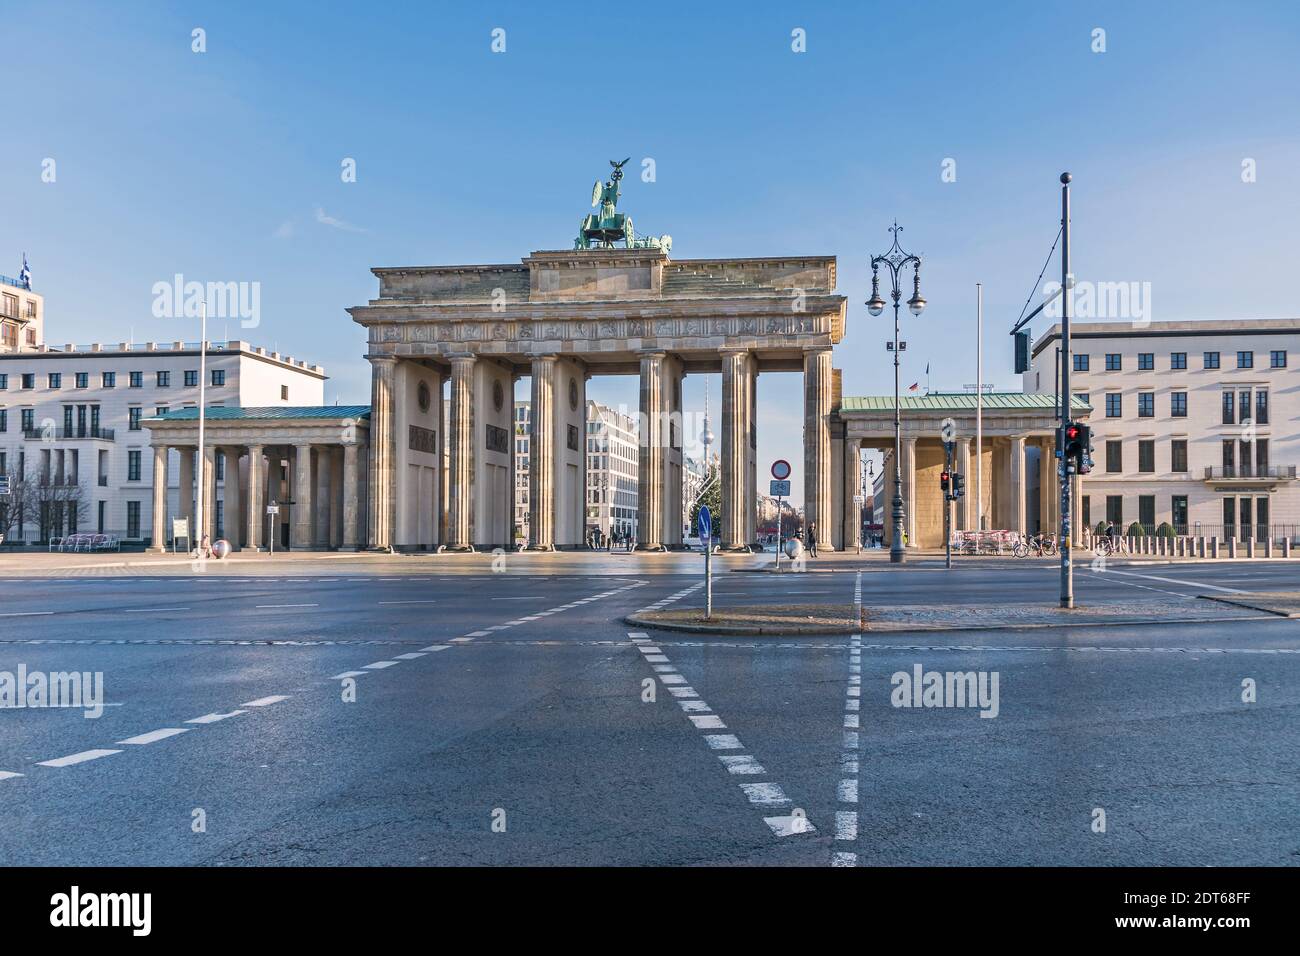 Berlin, Germany - December 18, 2020: Platz des 18. Maerz (18 of March Square) with the Brandenburg Gate, Hanukkah candlestick, decorated Christmas tre Stock Photo